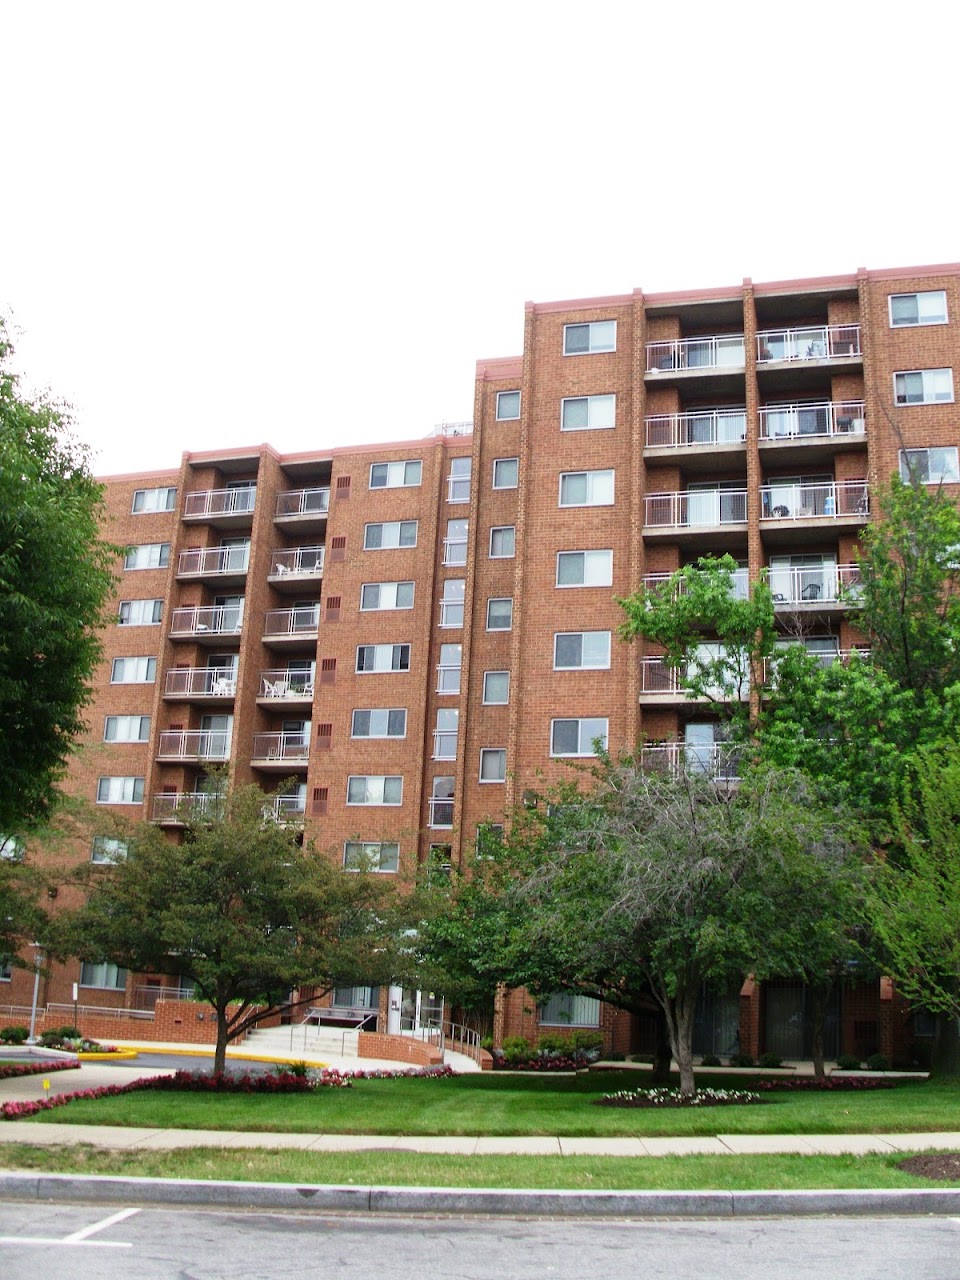 Photo of GOLDEN RULE APTS II. Affordable housing located at 901 NEW JERSEY AVE NW WASHINGTON, DC 20001